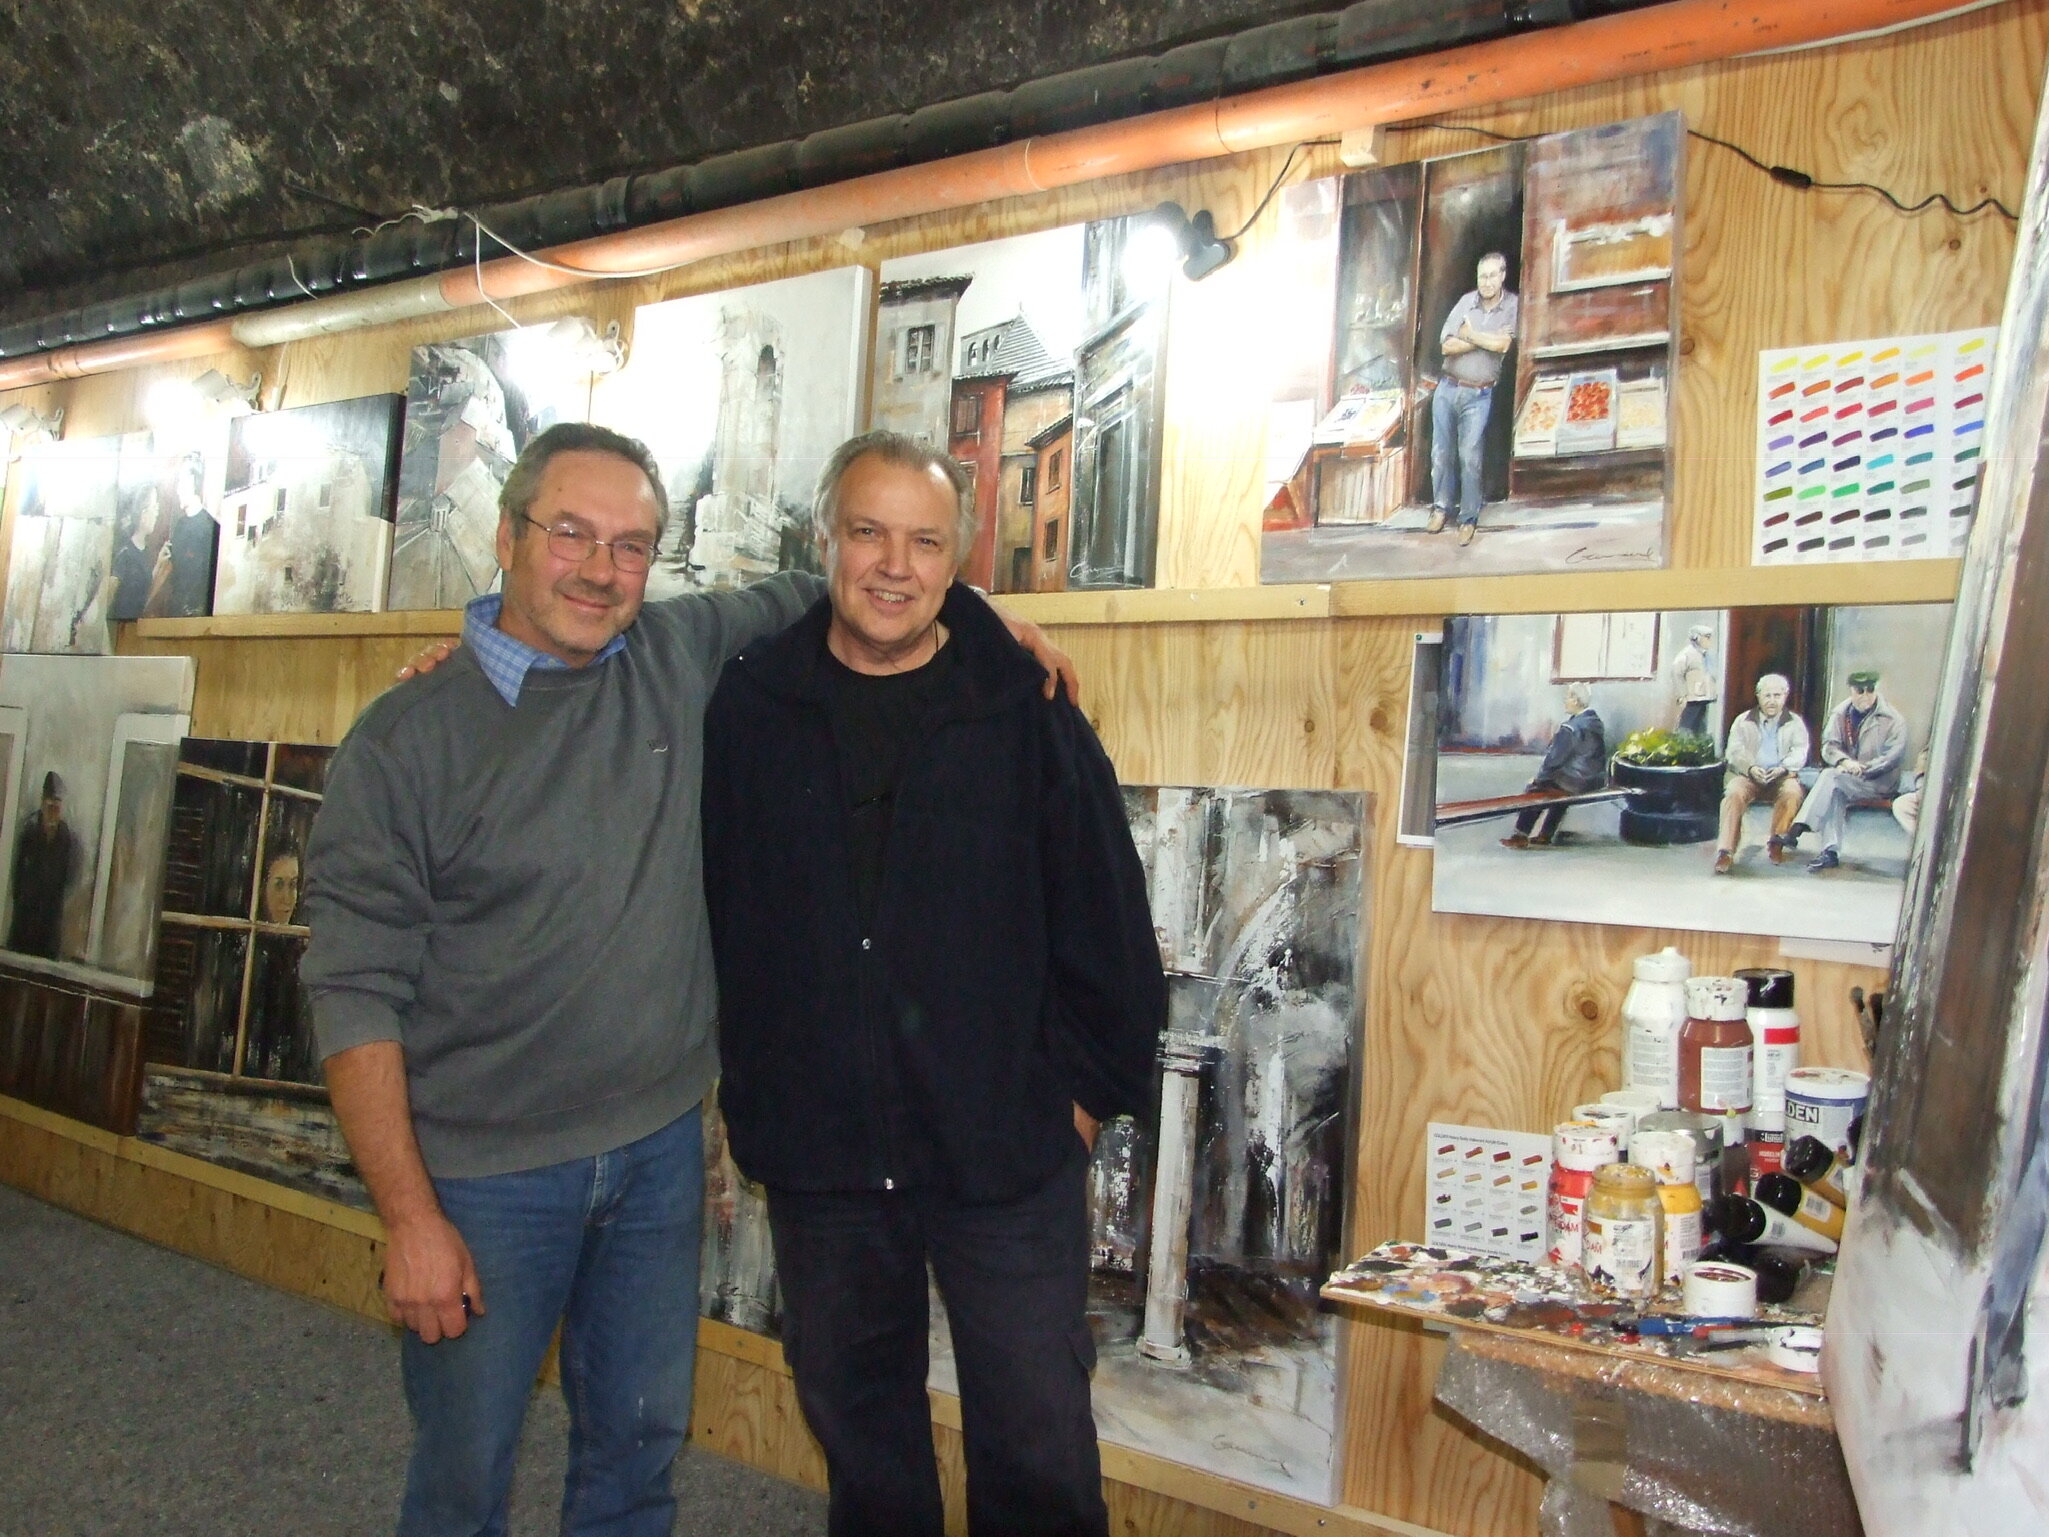  In the subterranean painting studio, Orvieto with Enrico, the subject of one of many portraits of the locals in Orvieto. His portrait is hanging above Victor’s left shoulder.  